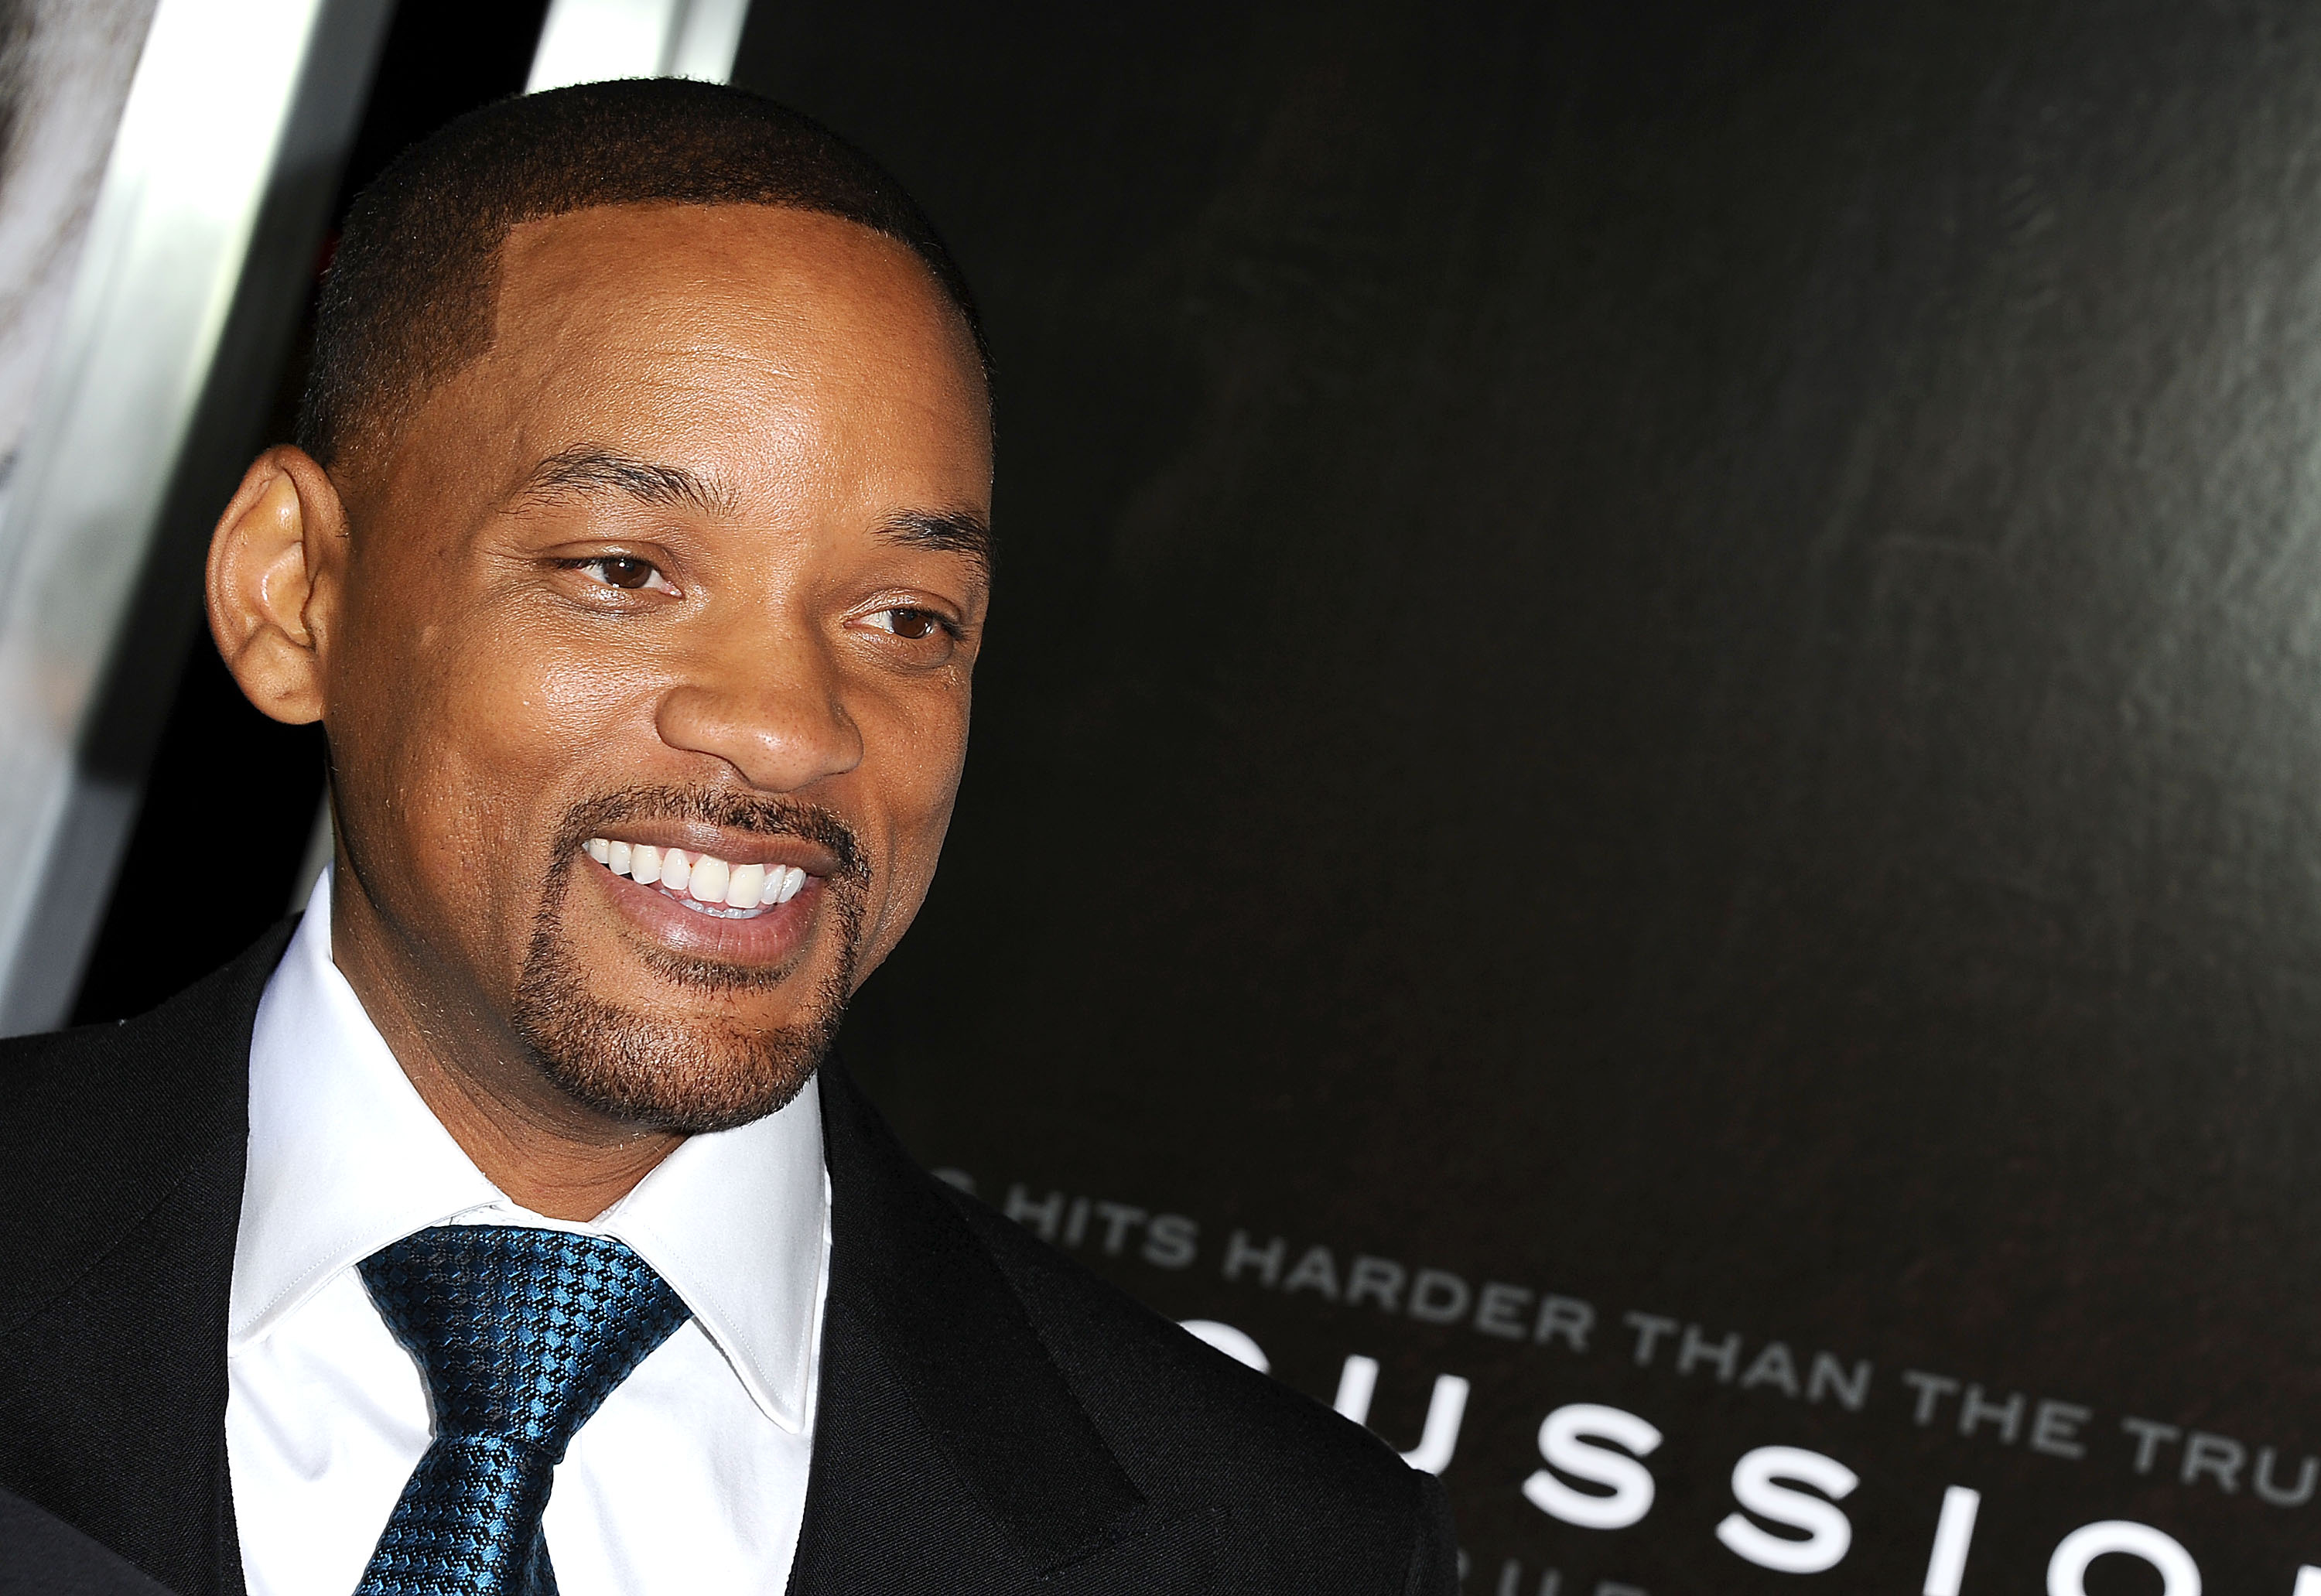 Actor Will Smith attends a screening of "Concussion" at Regency Village Theatre on November 23, 2015 in Westwood, California. (Jason LaVeris—FilmMagic/Getty Images)